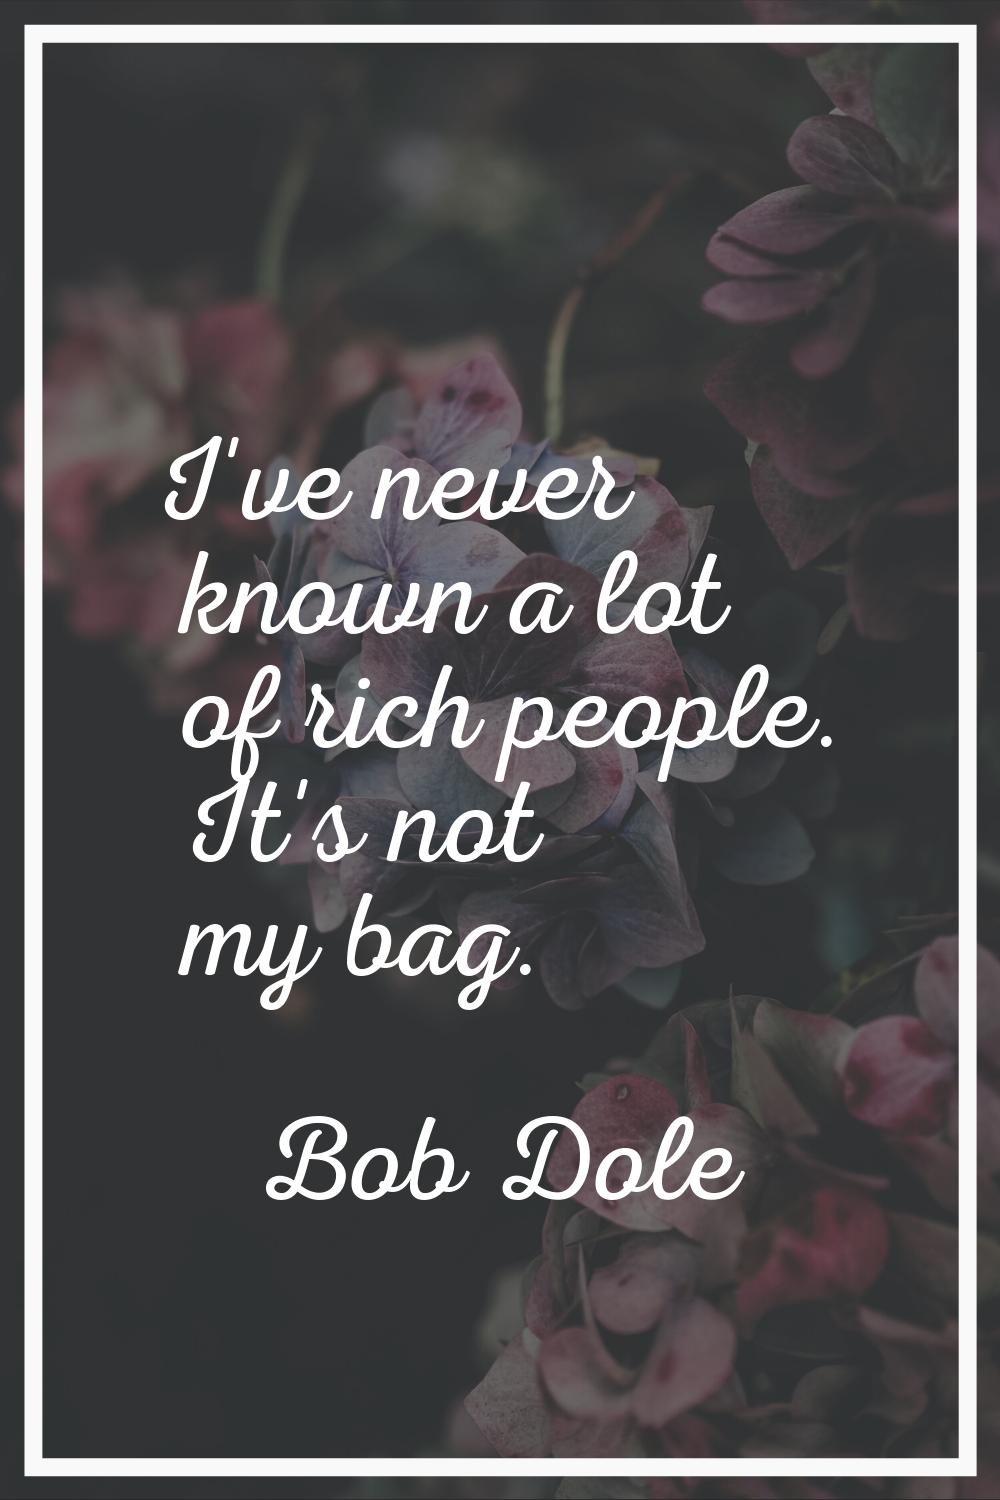 I've never known a lot of rich people. It's not my bag.